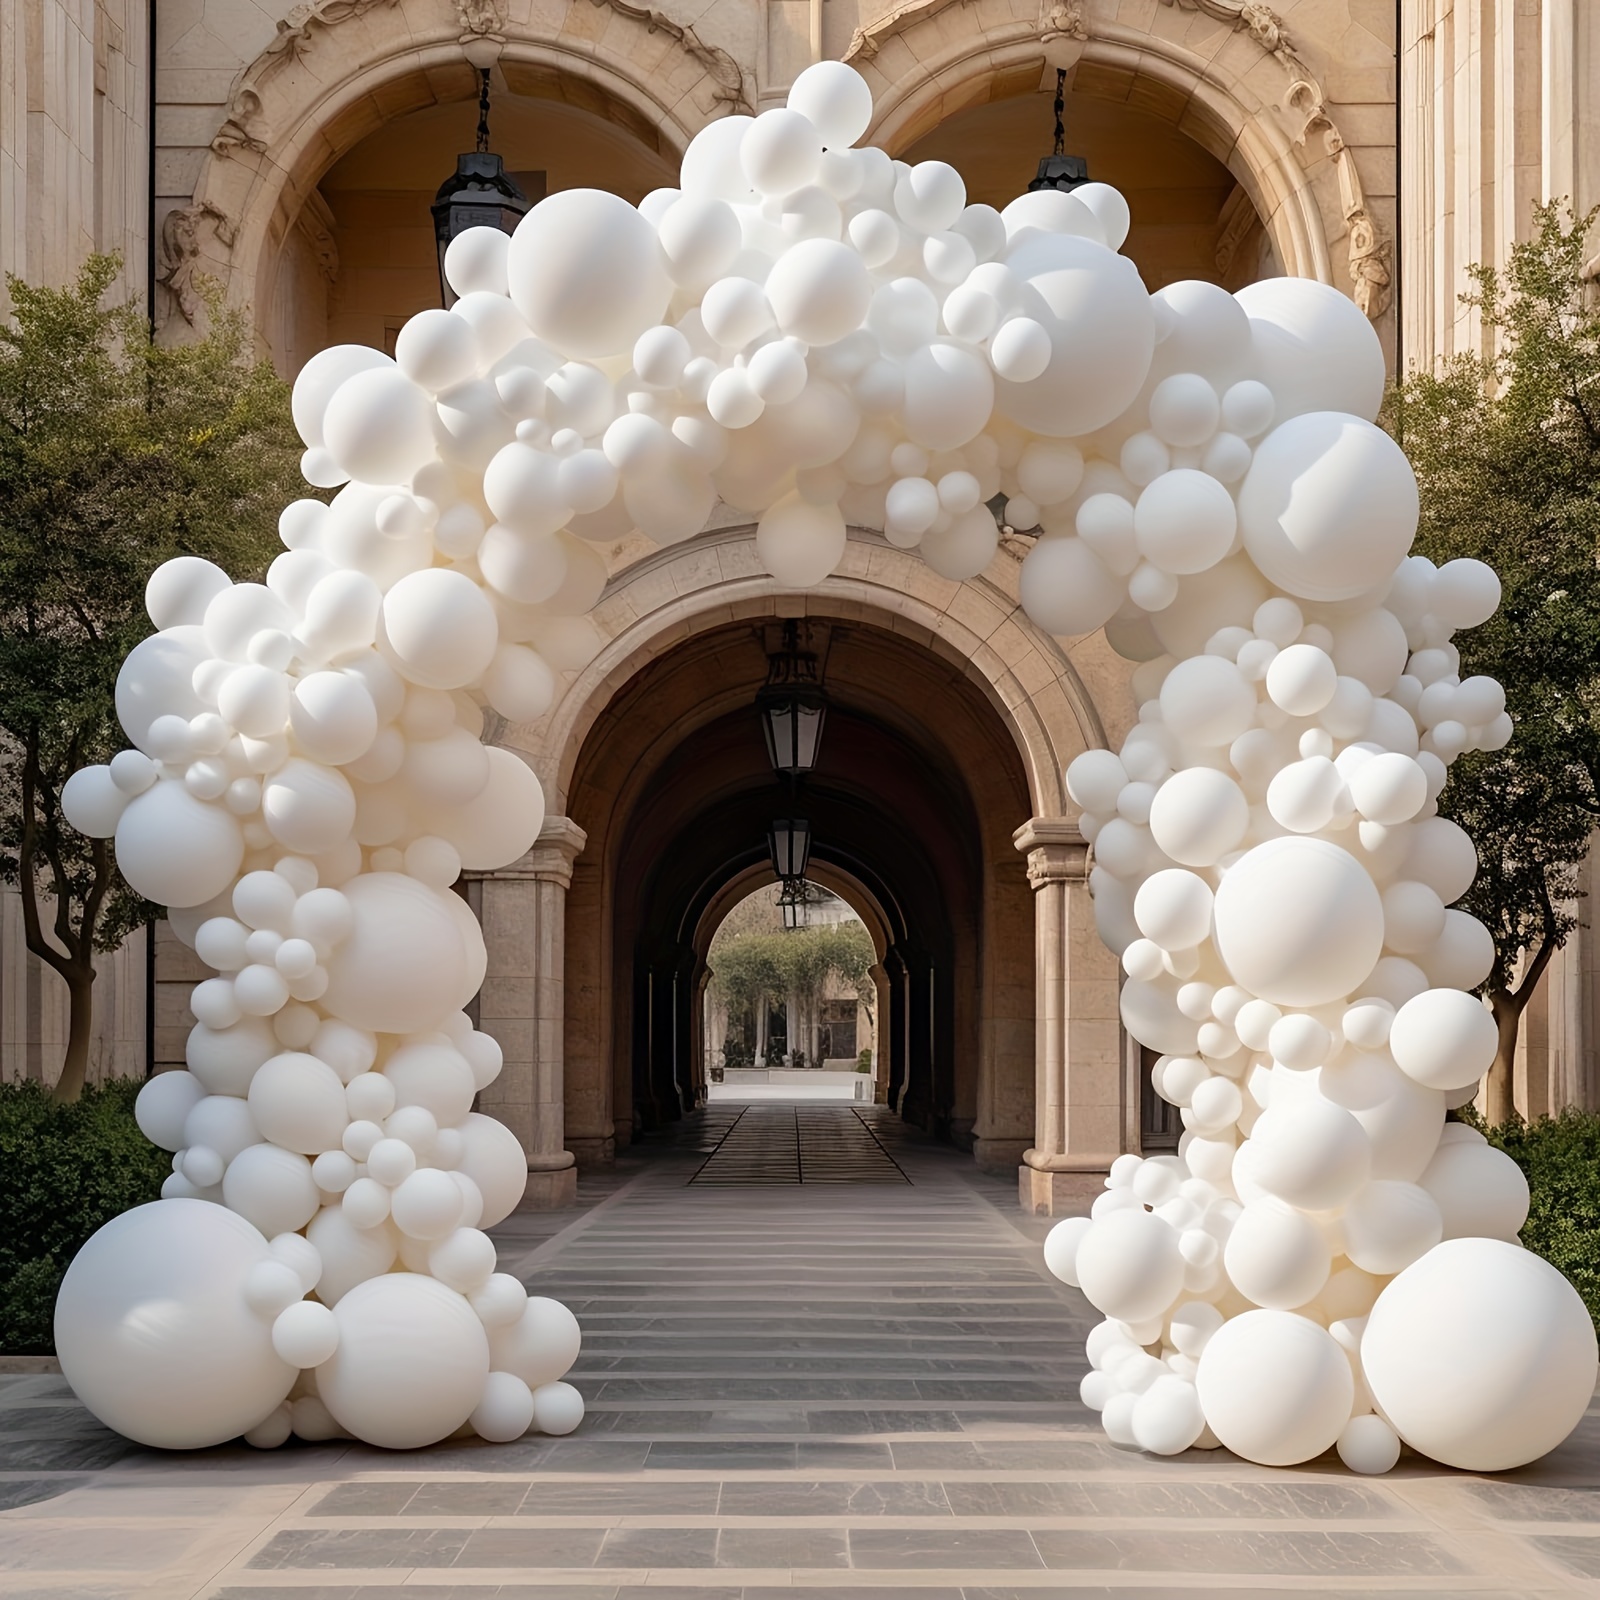 

White Balloon Assortment 132pcs For Diy Garlands & Arches - Ideal For Birthday Parties, Graduations, Engagements, Weddings, & Anniversary Decorations - Suitable For Kids 3-12 Years - Latex Balloon Kit